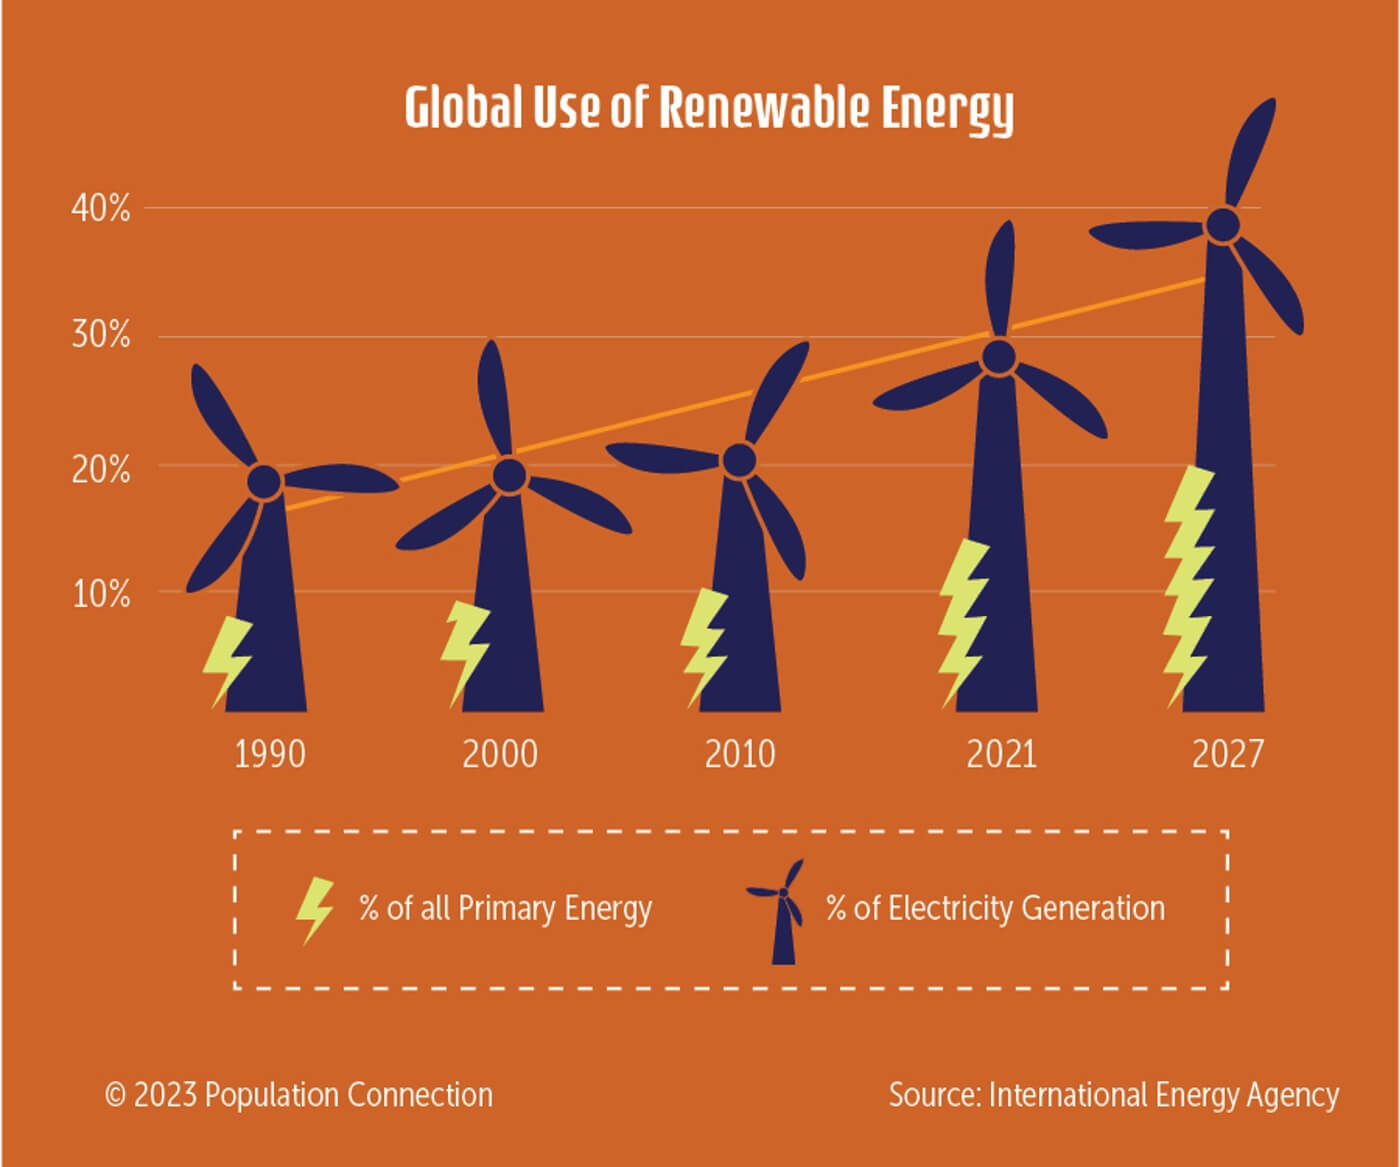 A graph that shows a rise in the global use of renewable energy from 1990 to 2027